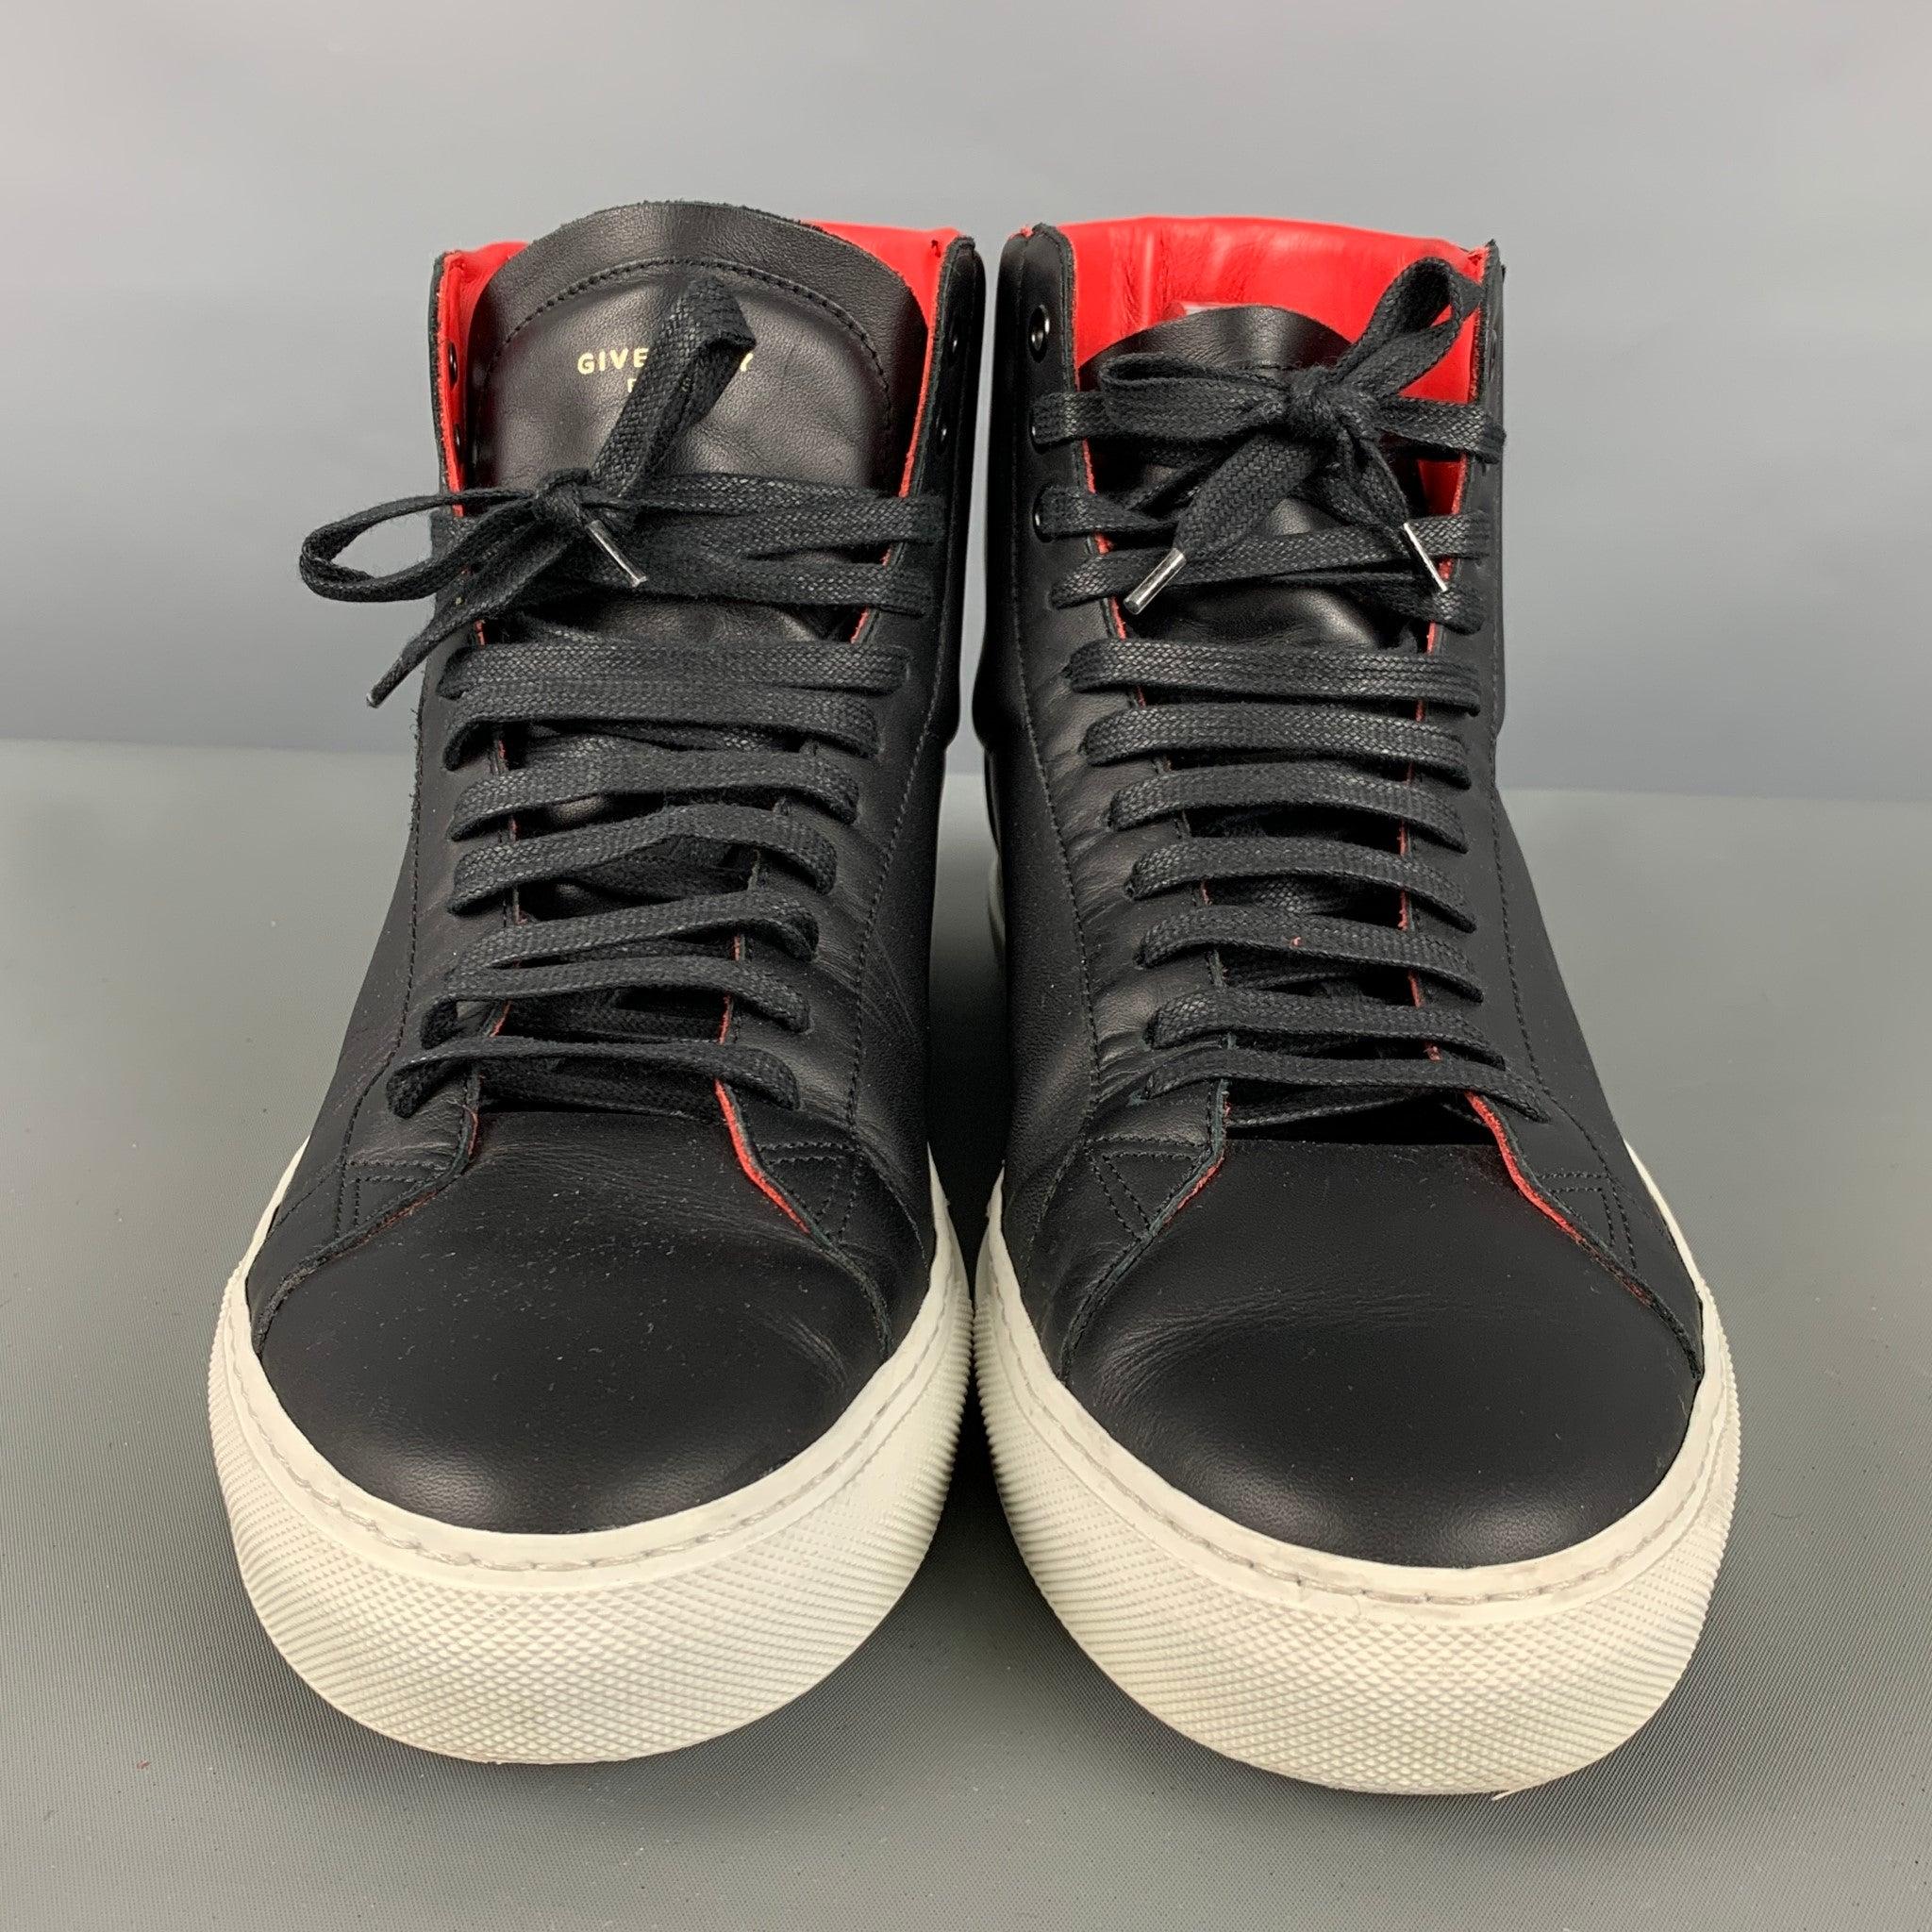 Men's GIVENCHY Size 10 Black Red & White Color Block Leather High Top Sneakers